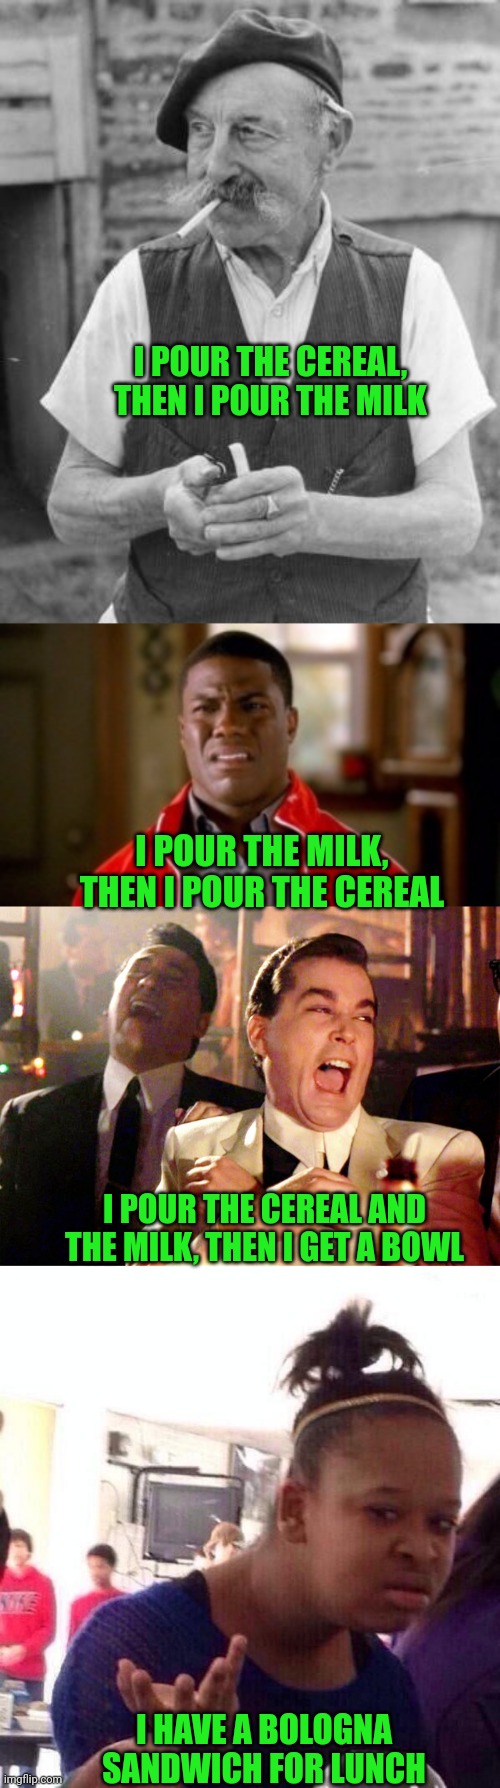 It's 5 O'clock (and Breakfast Time) Somewhere | I POUR THE CEREAL, THEN I POUR THE MILK; I POUR THE MILK, THEN I POUR THE CEREAL; I POUR THE CEREAL AND THE MILK, THEN I GET A BOWL; I HAVE A BOLOGNA SANDWICH FOR LUNCH | image tagged in memes old man frenchman,memes disgusted,memes,good fellas hilarious,black girl wat | made w/ Imgflip meme maker